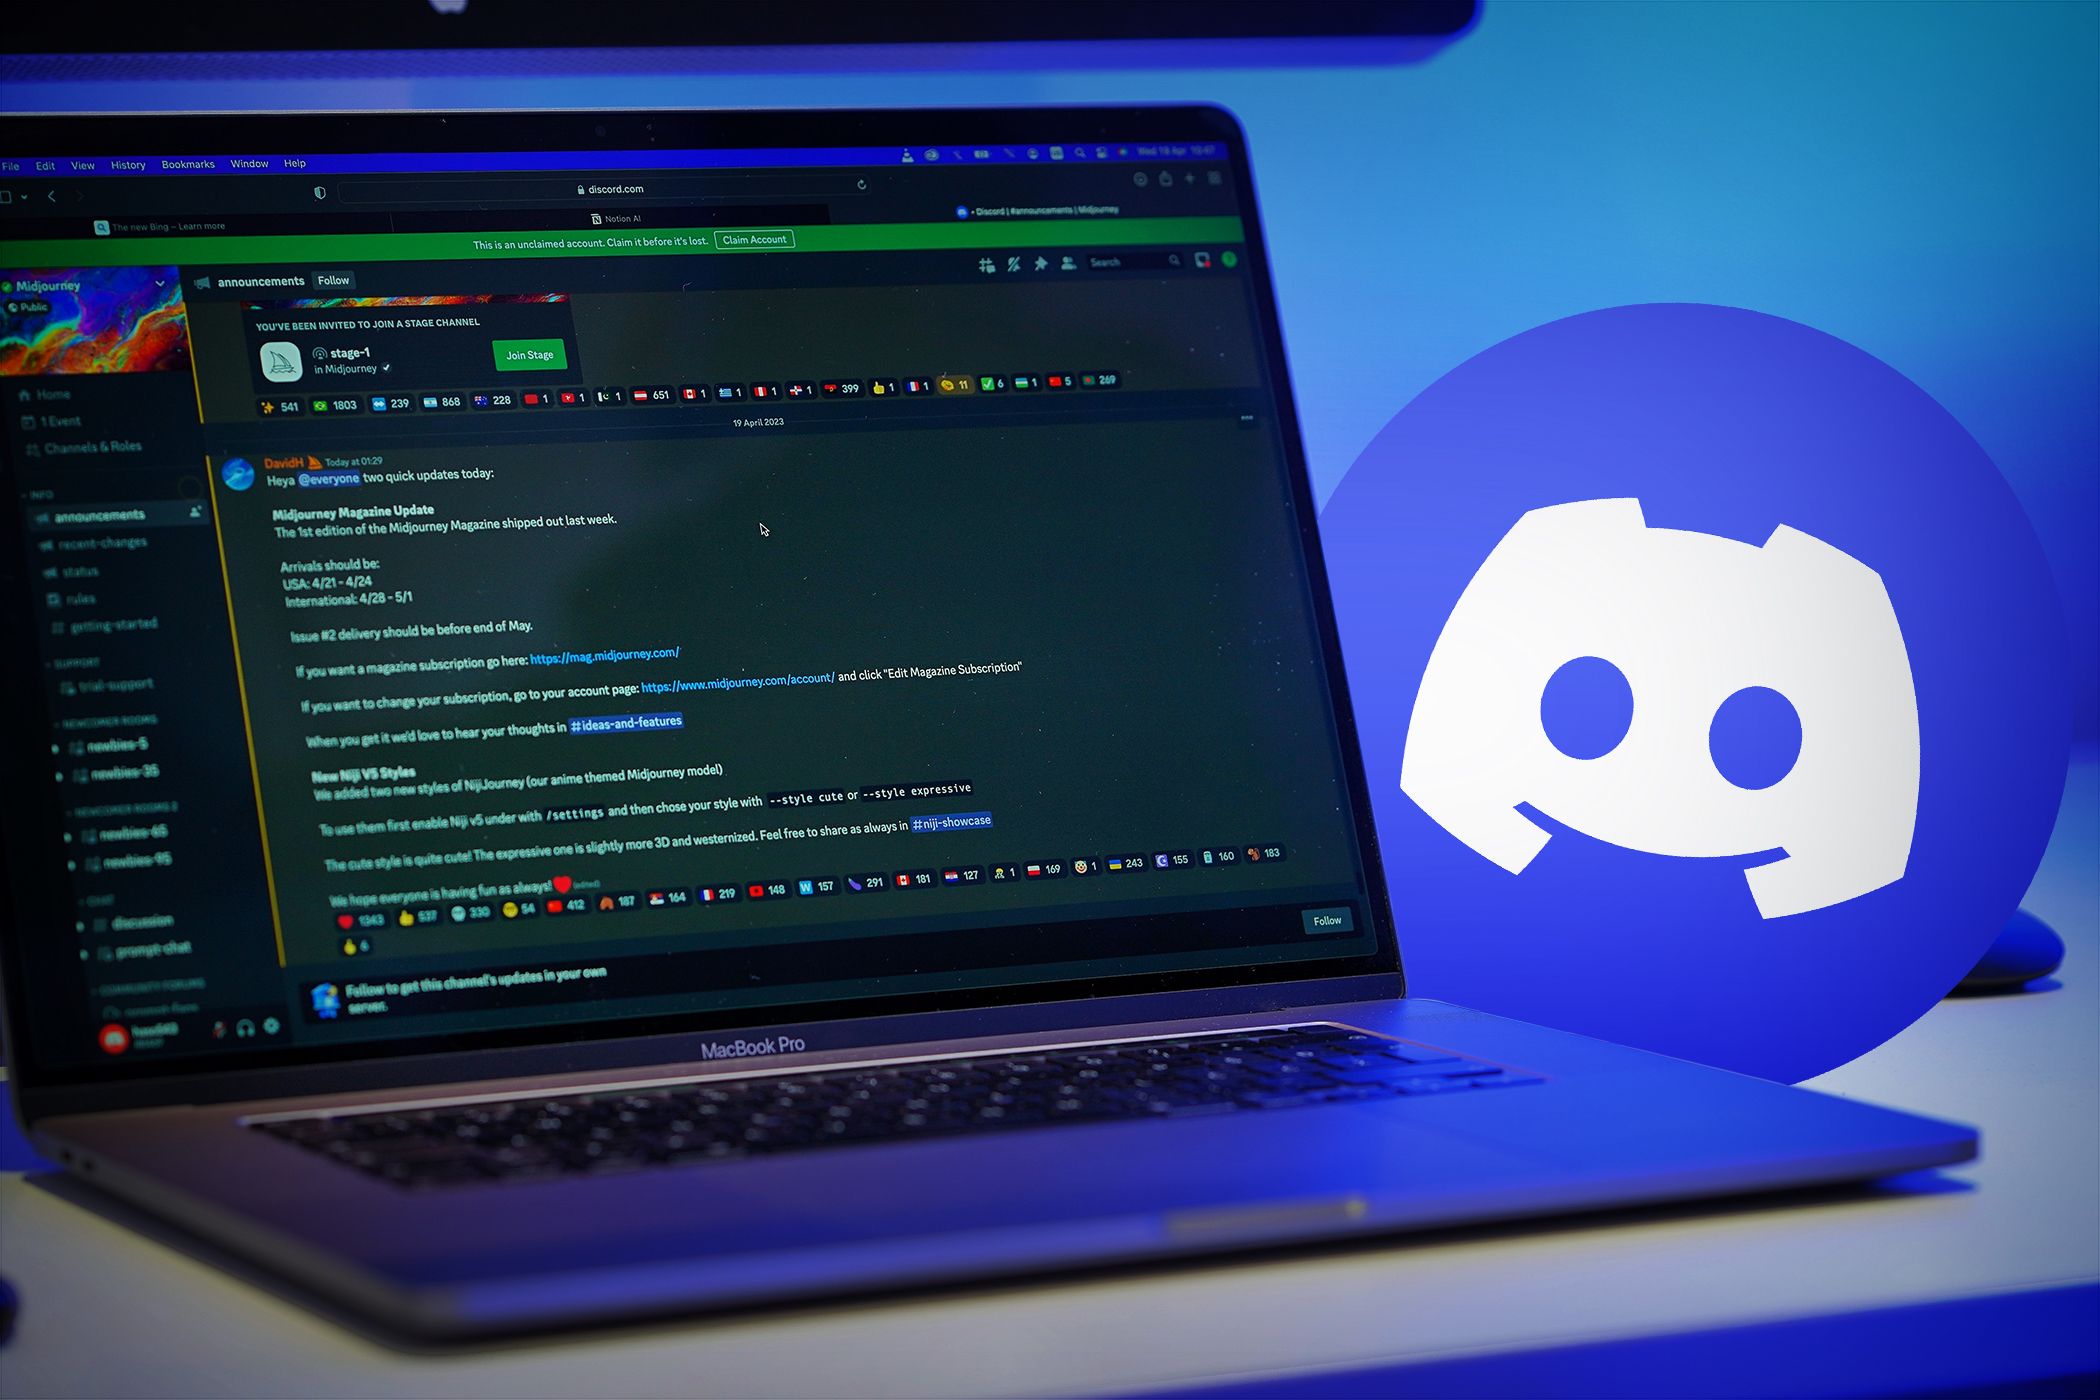 Laptop displaying a Discord chat with a glowing Discord logo beside it, highlighting online communication and community engagement.